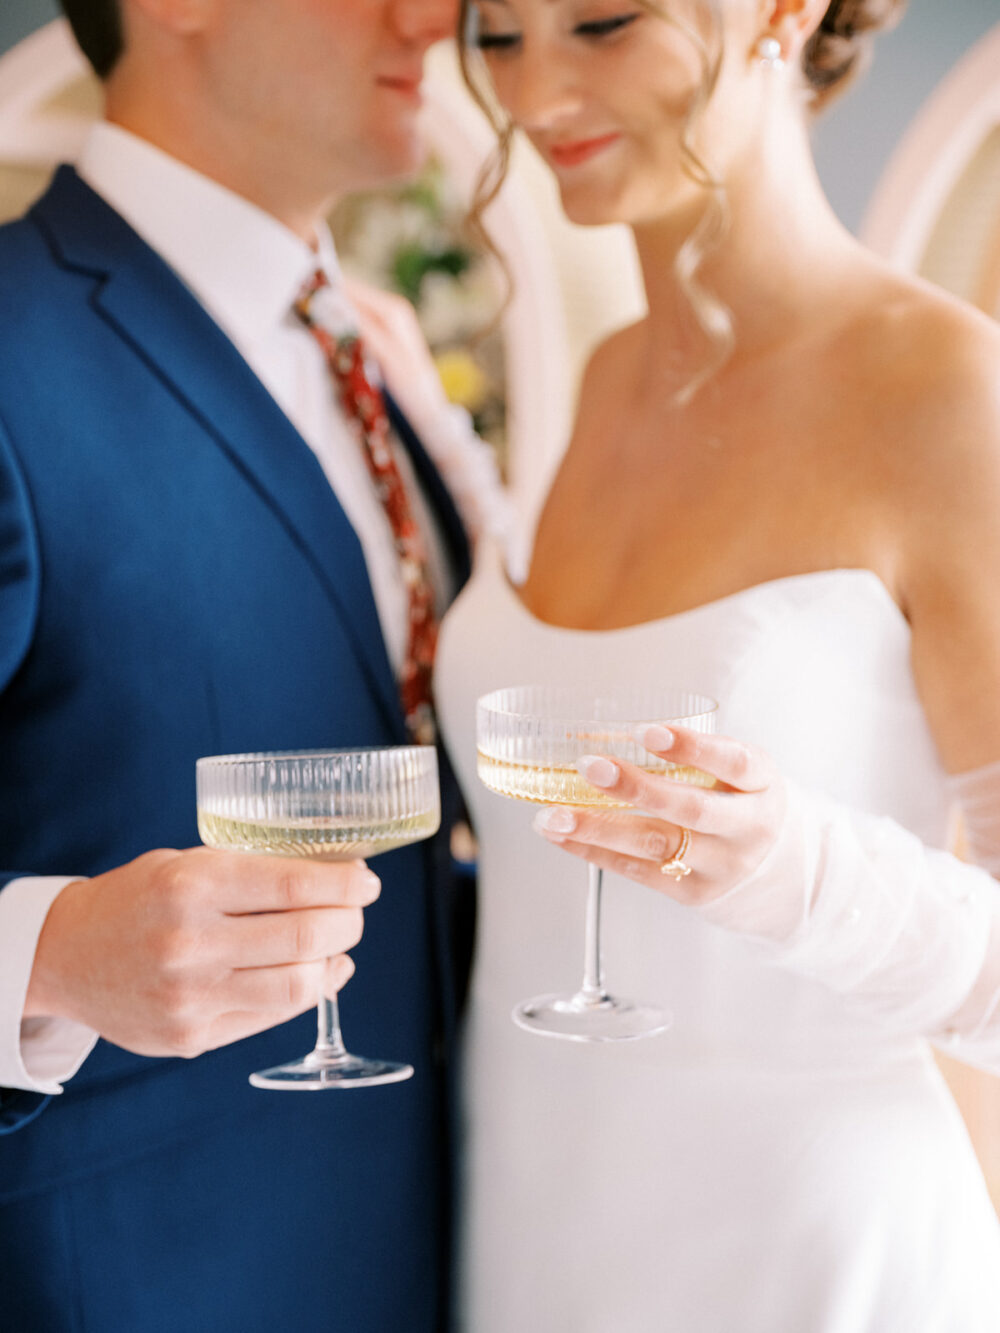 Bride and groom sharing a champagne during their Orlando wedding photographed by Juliana Kae